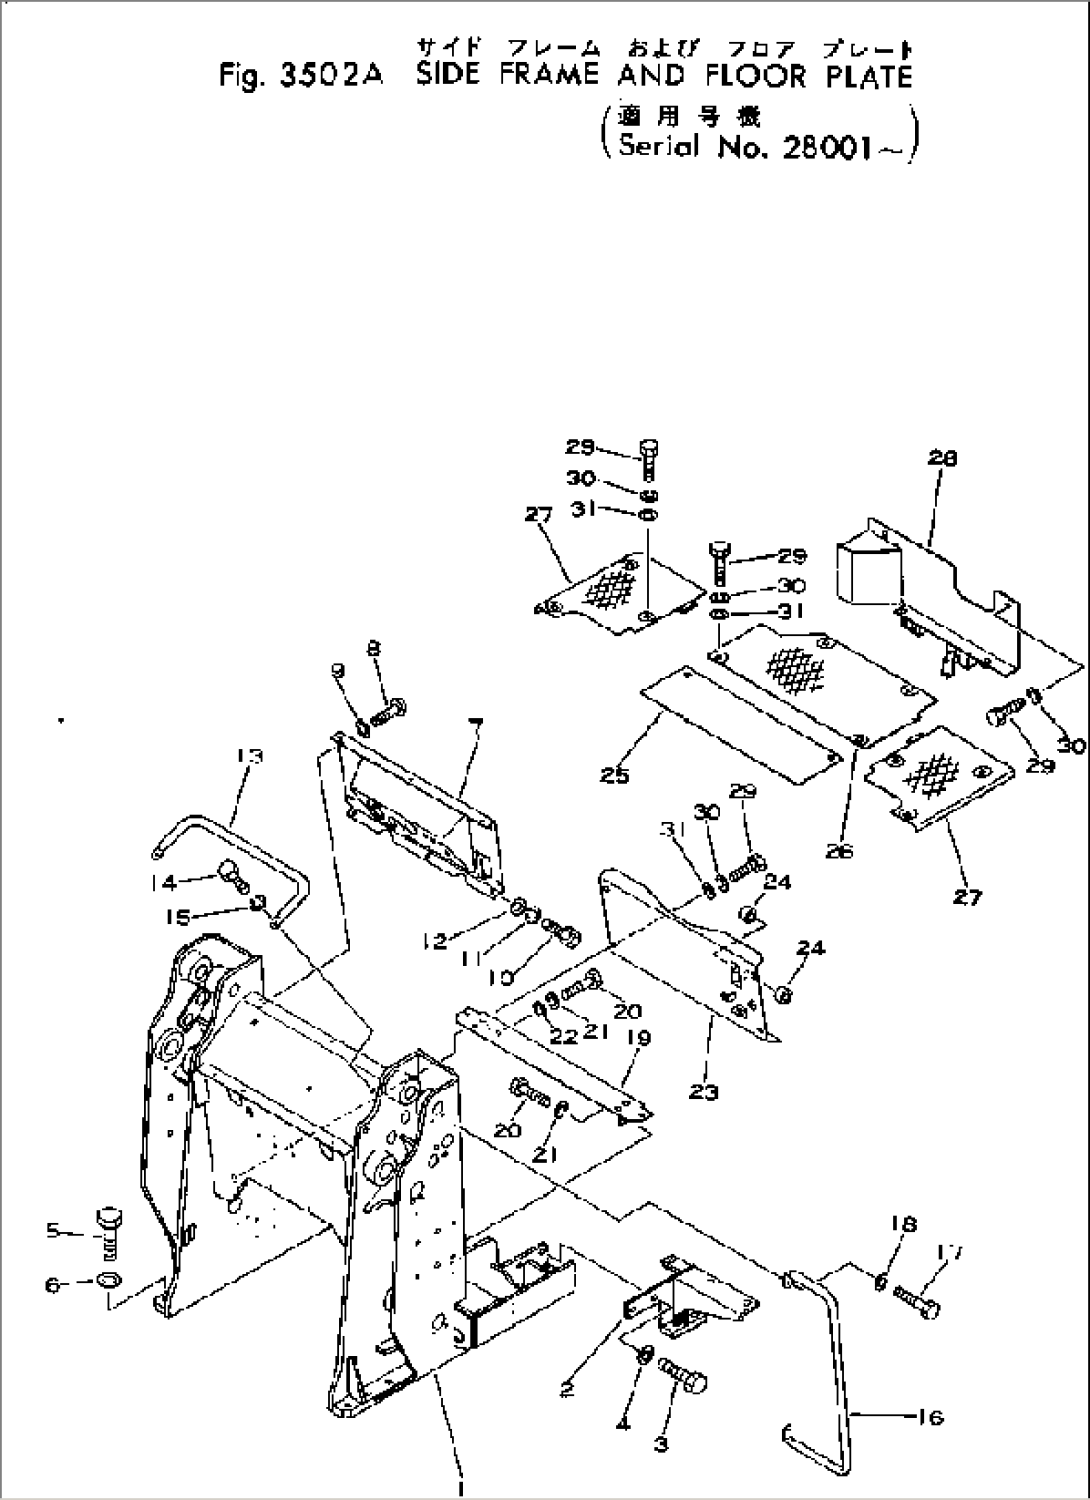 SIDE FRAME AND FLOOR PLATE(#28001-)